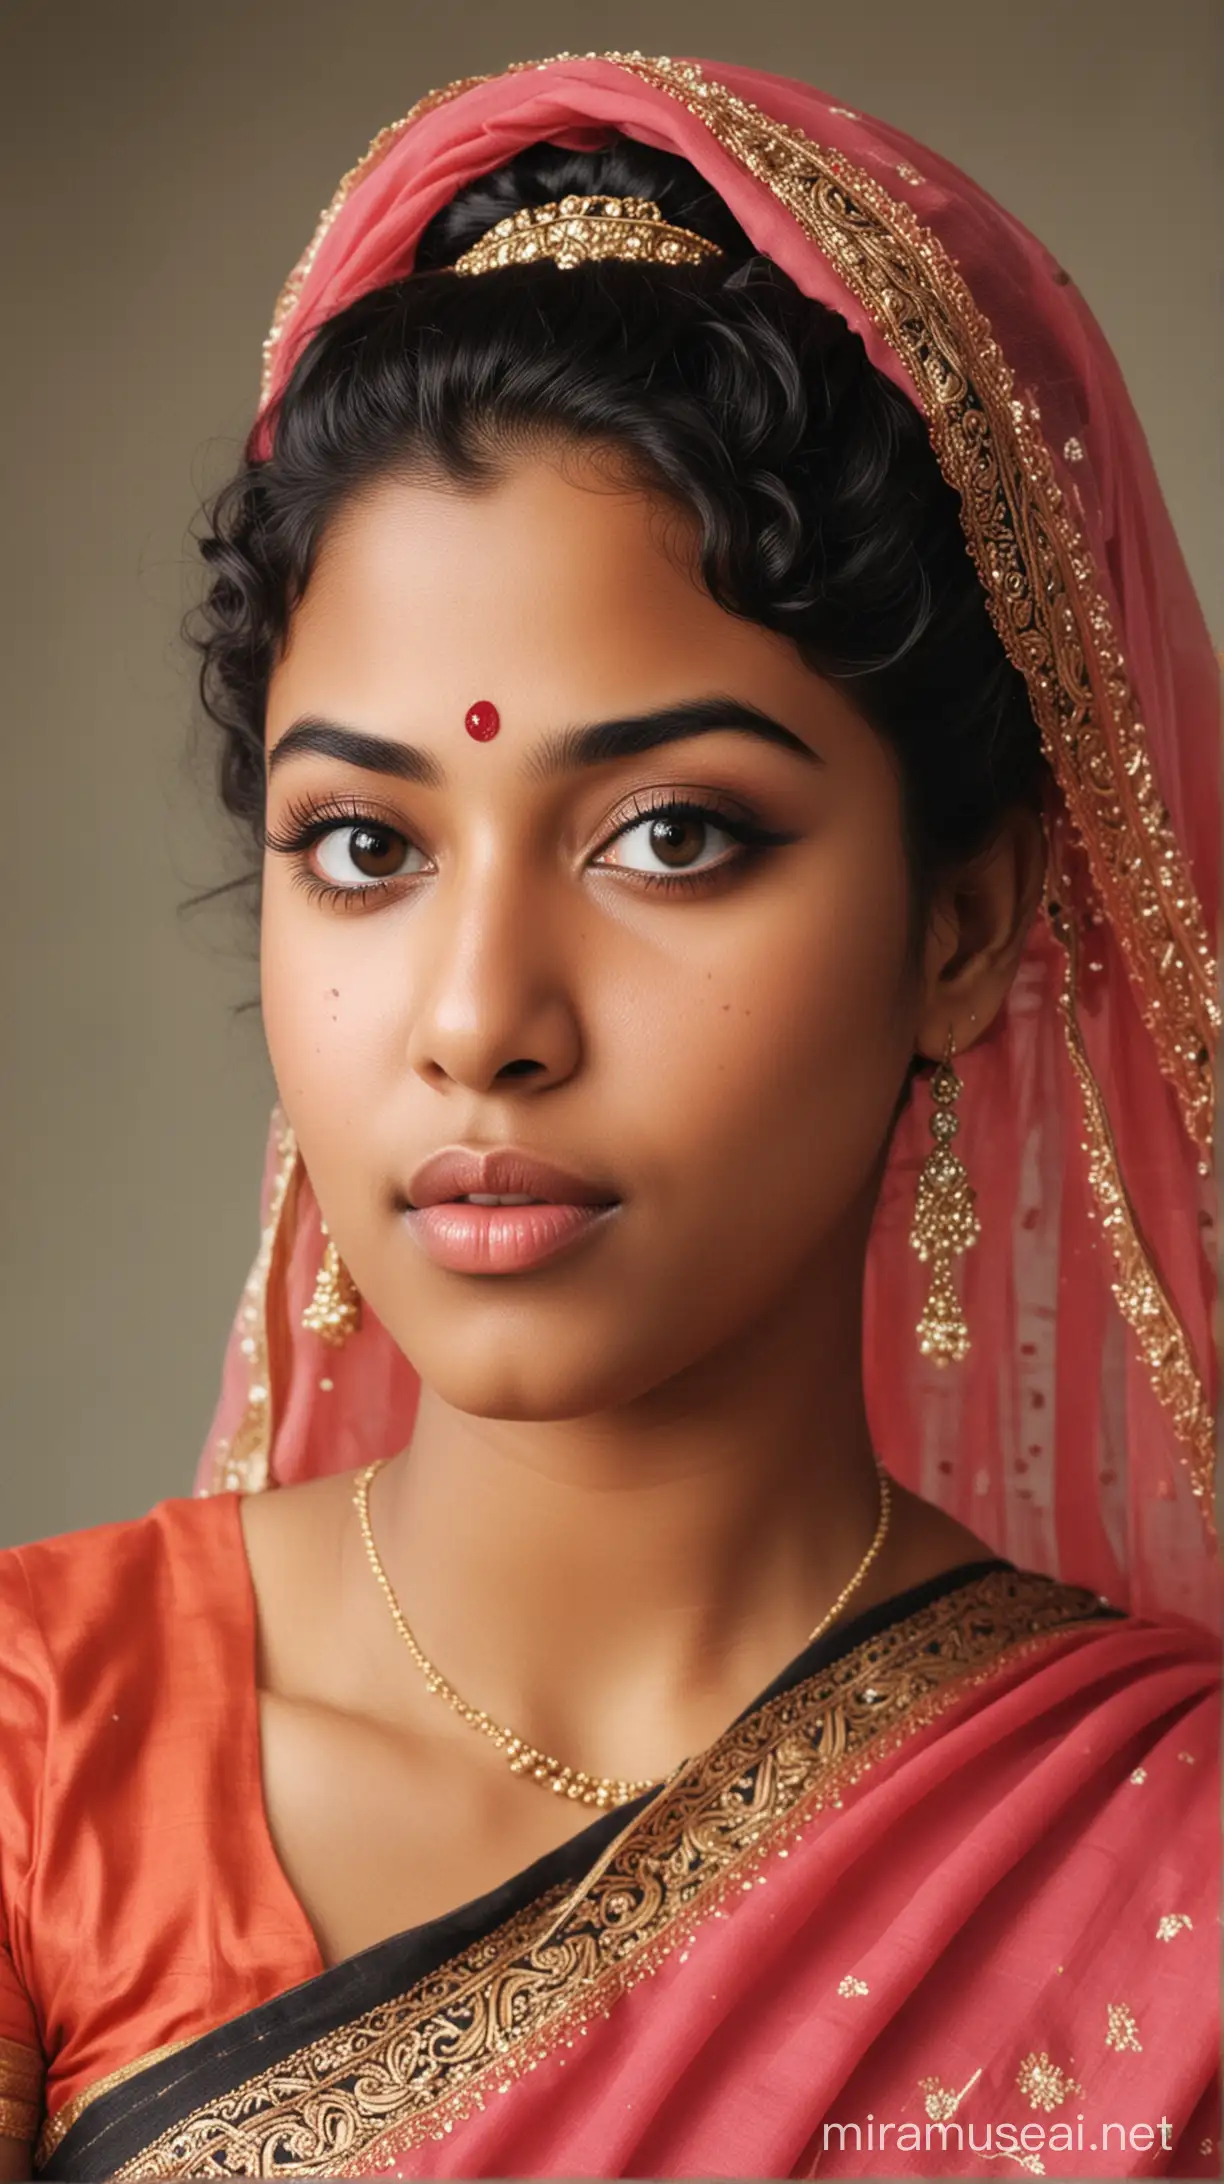 A 17 year old black fat woman with small eyes, small nose, wide lips, weak chin and long curly black hair with a bun at back wearing a saree with a veil on head